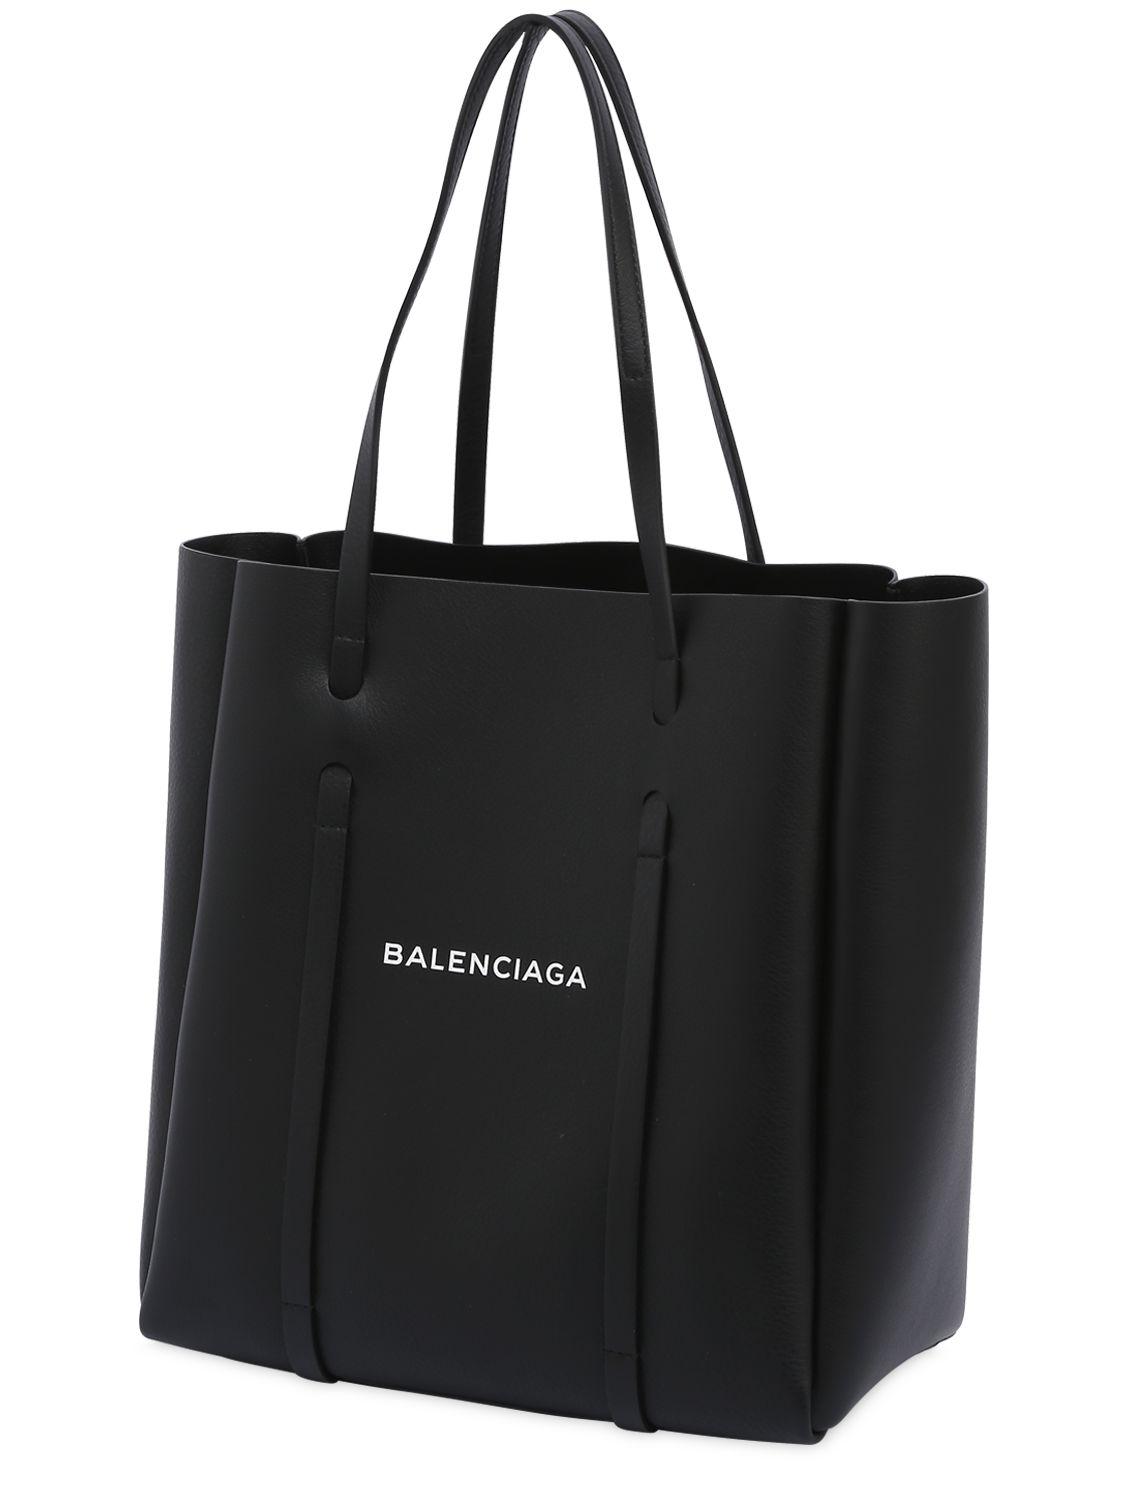 Balenciaga Small Everyday Leather Tote Bag in Black - Lyst